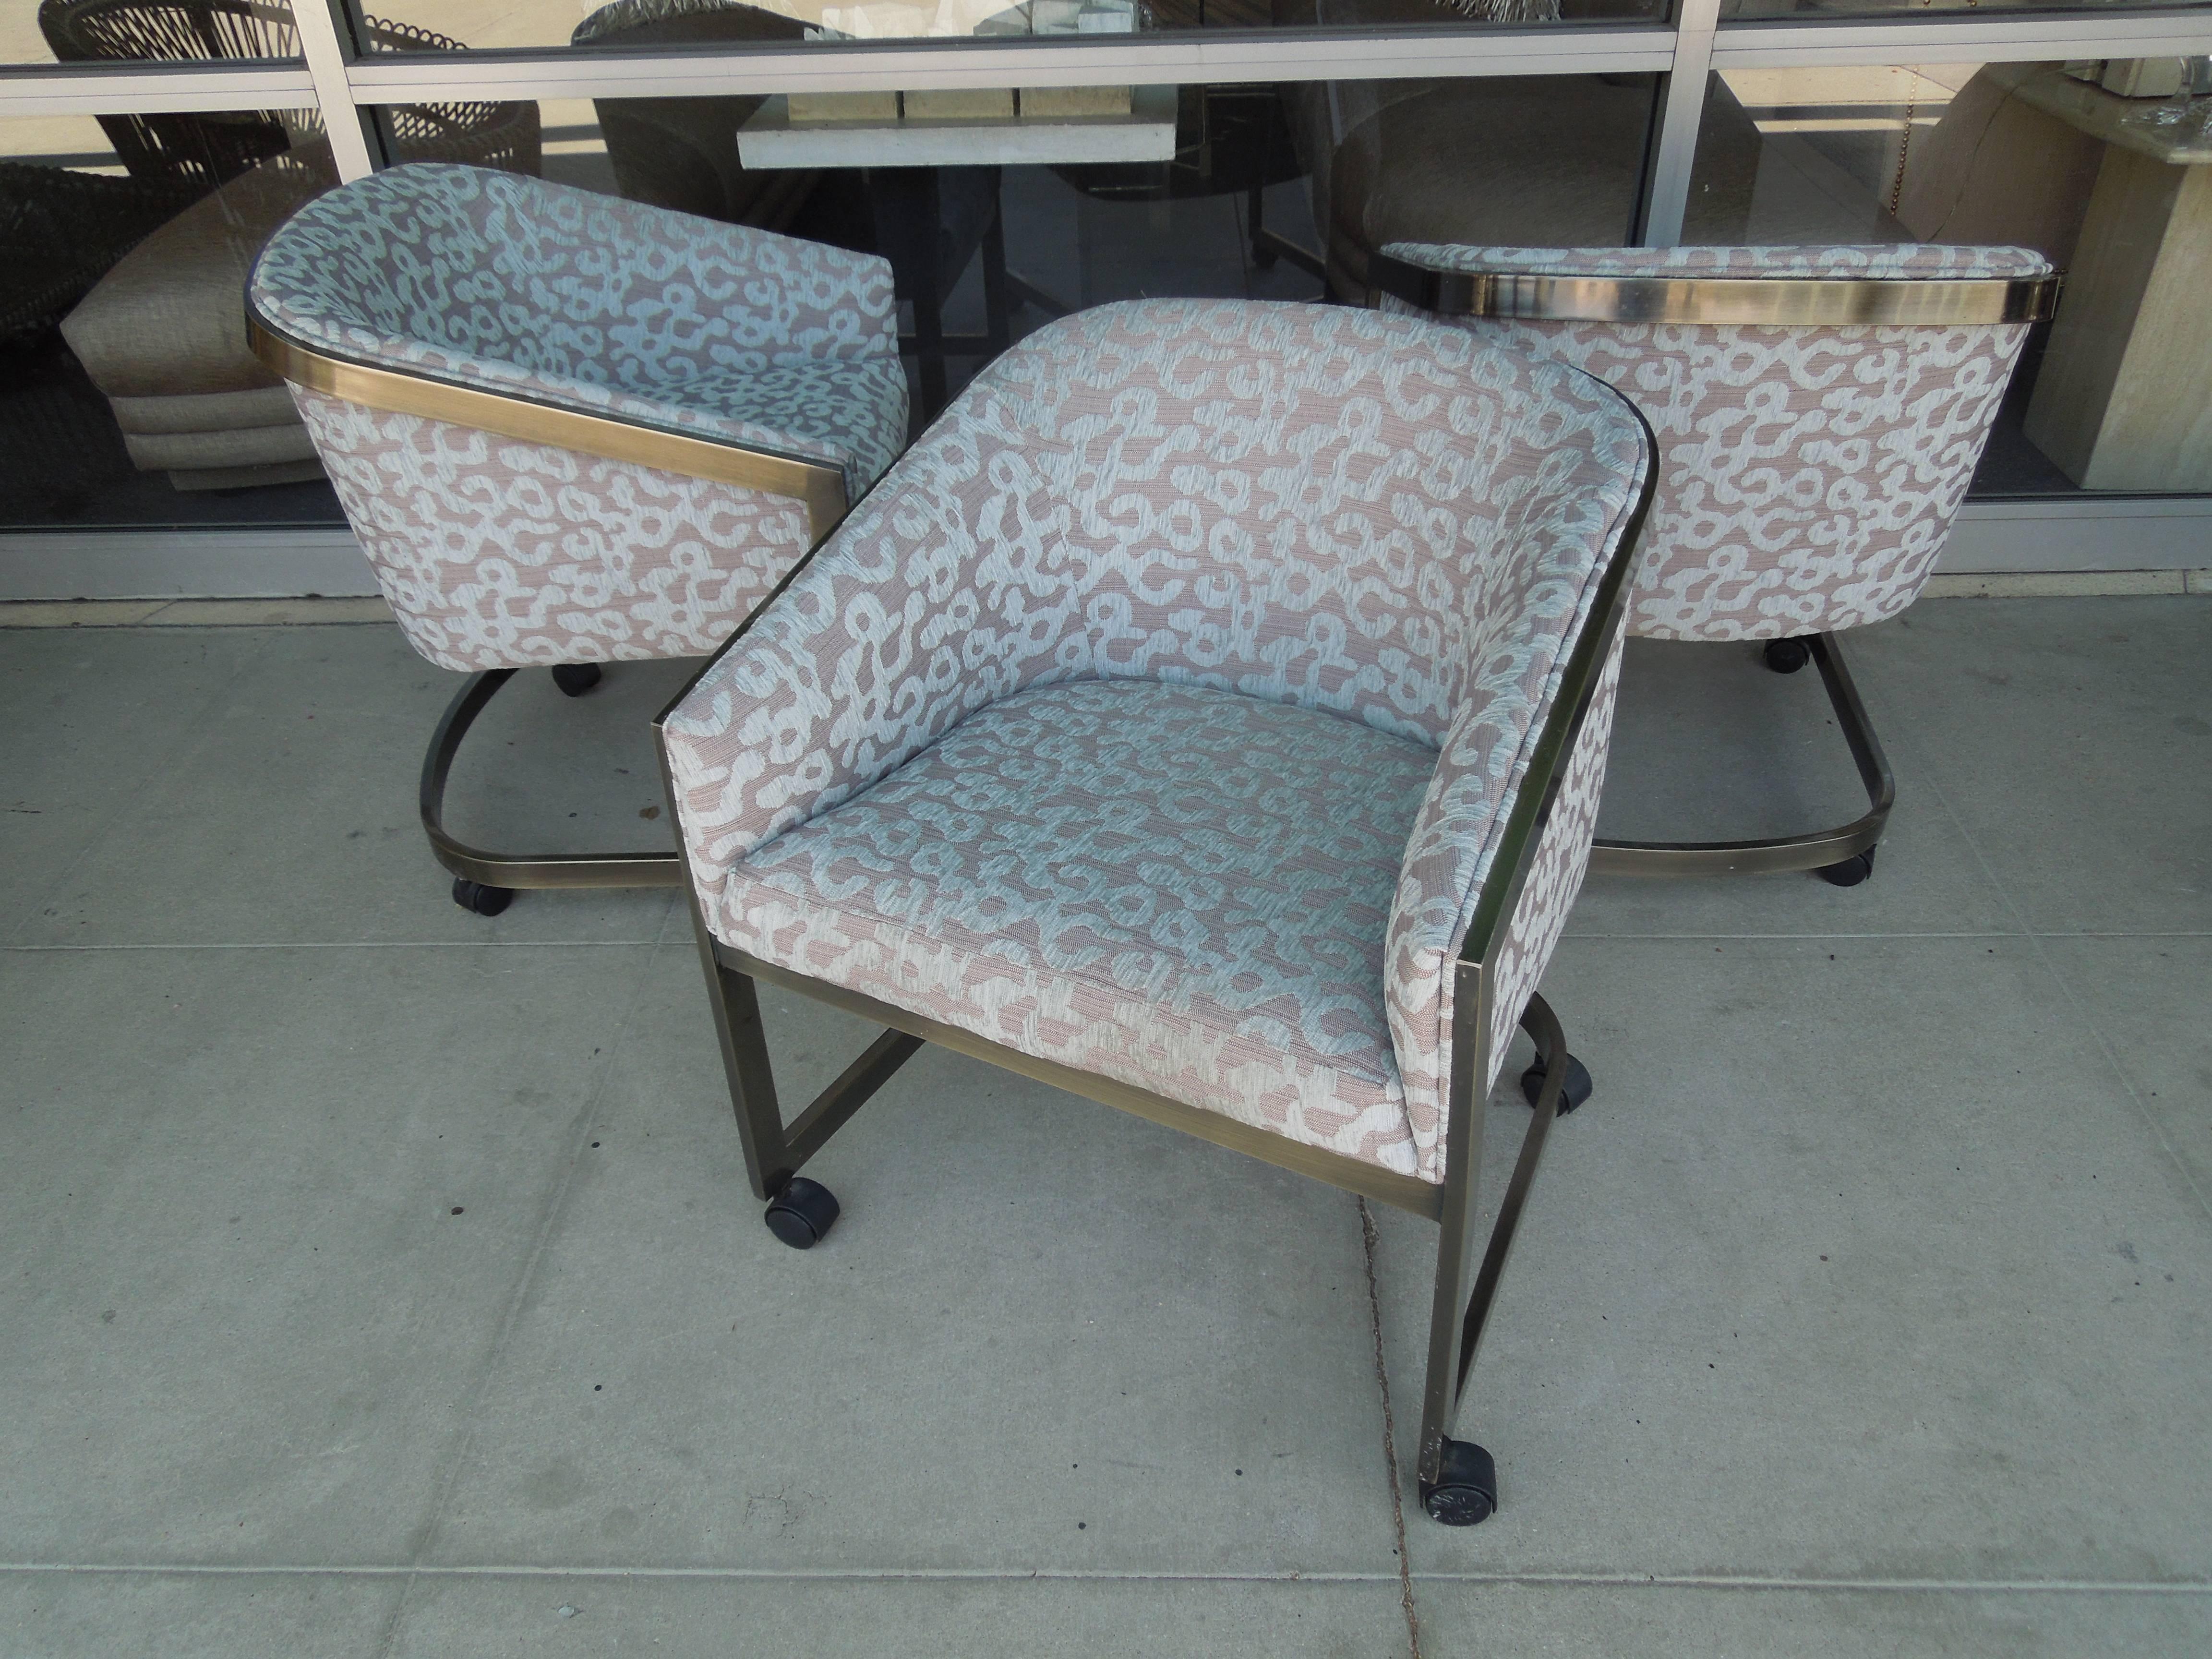 A super chic set of three bronze finish bucket chairs on casters made by Design Institute of America. From a very chic vintage Palm Springs Estate, the chairs have been newly upholstered in a high end European jacquard in modern grafitti pattern.